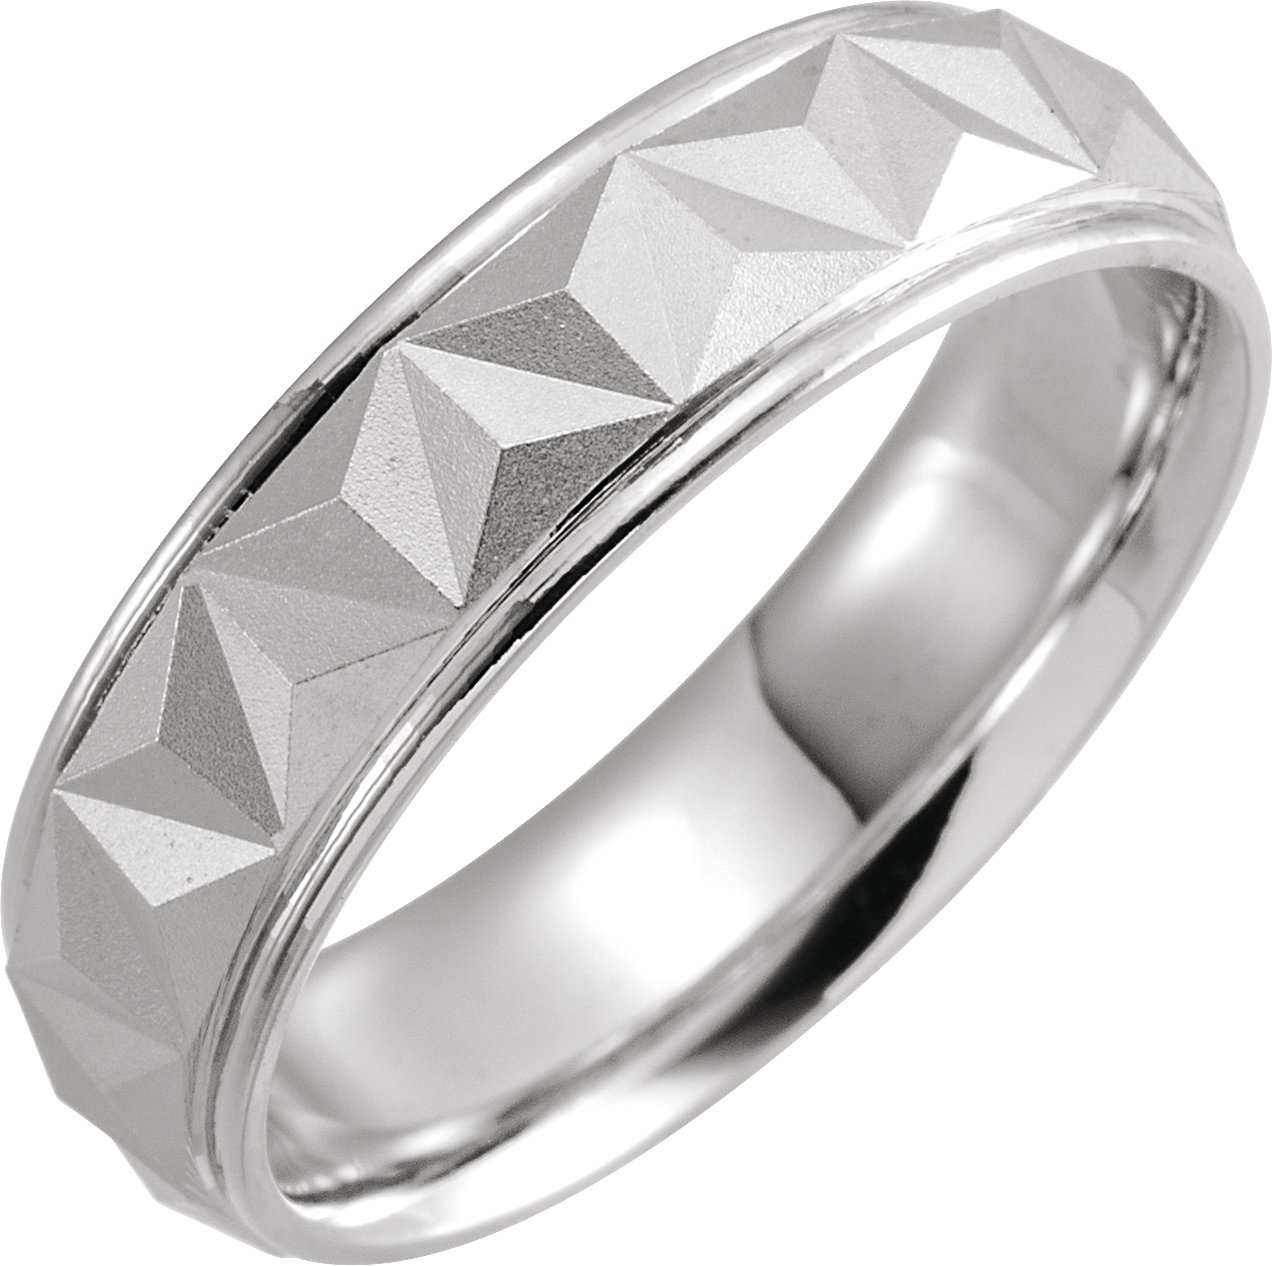 Sterling Silver 6 mm Geometric Band with Matte/Polished Finish Size 15.5